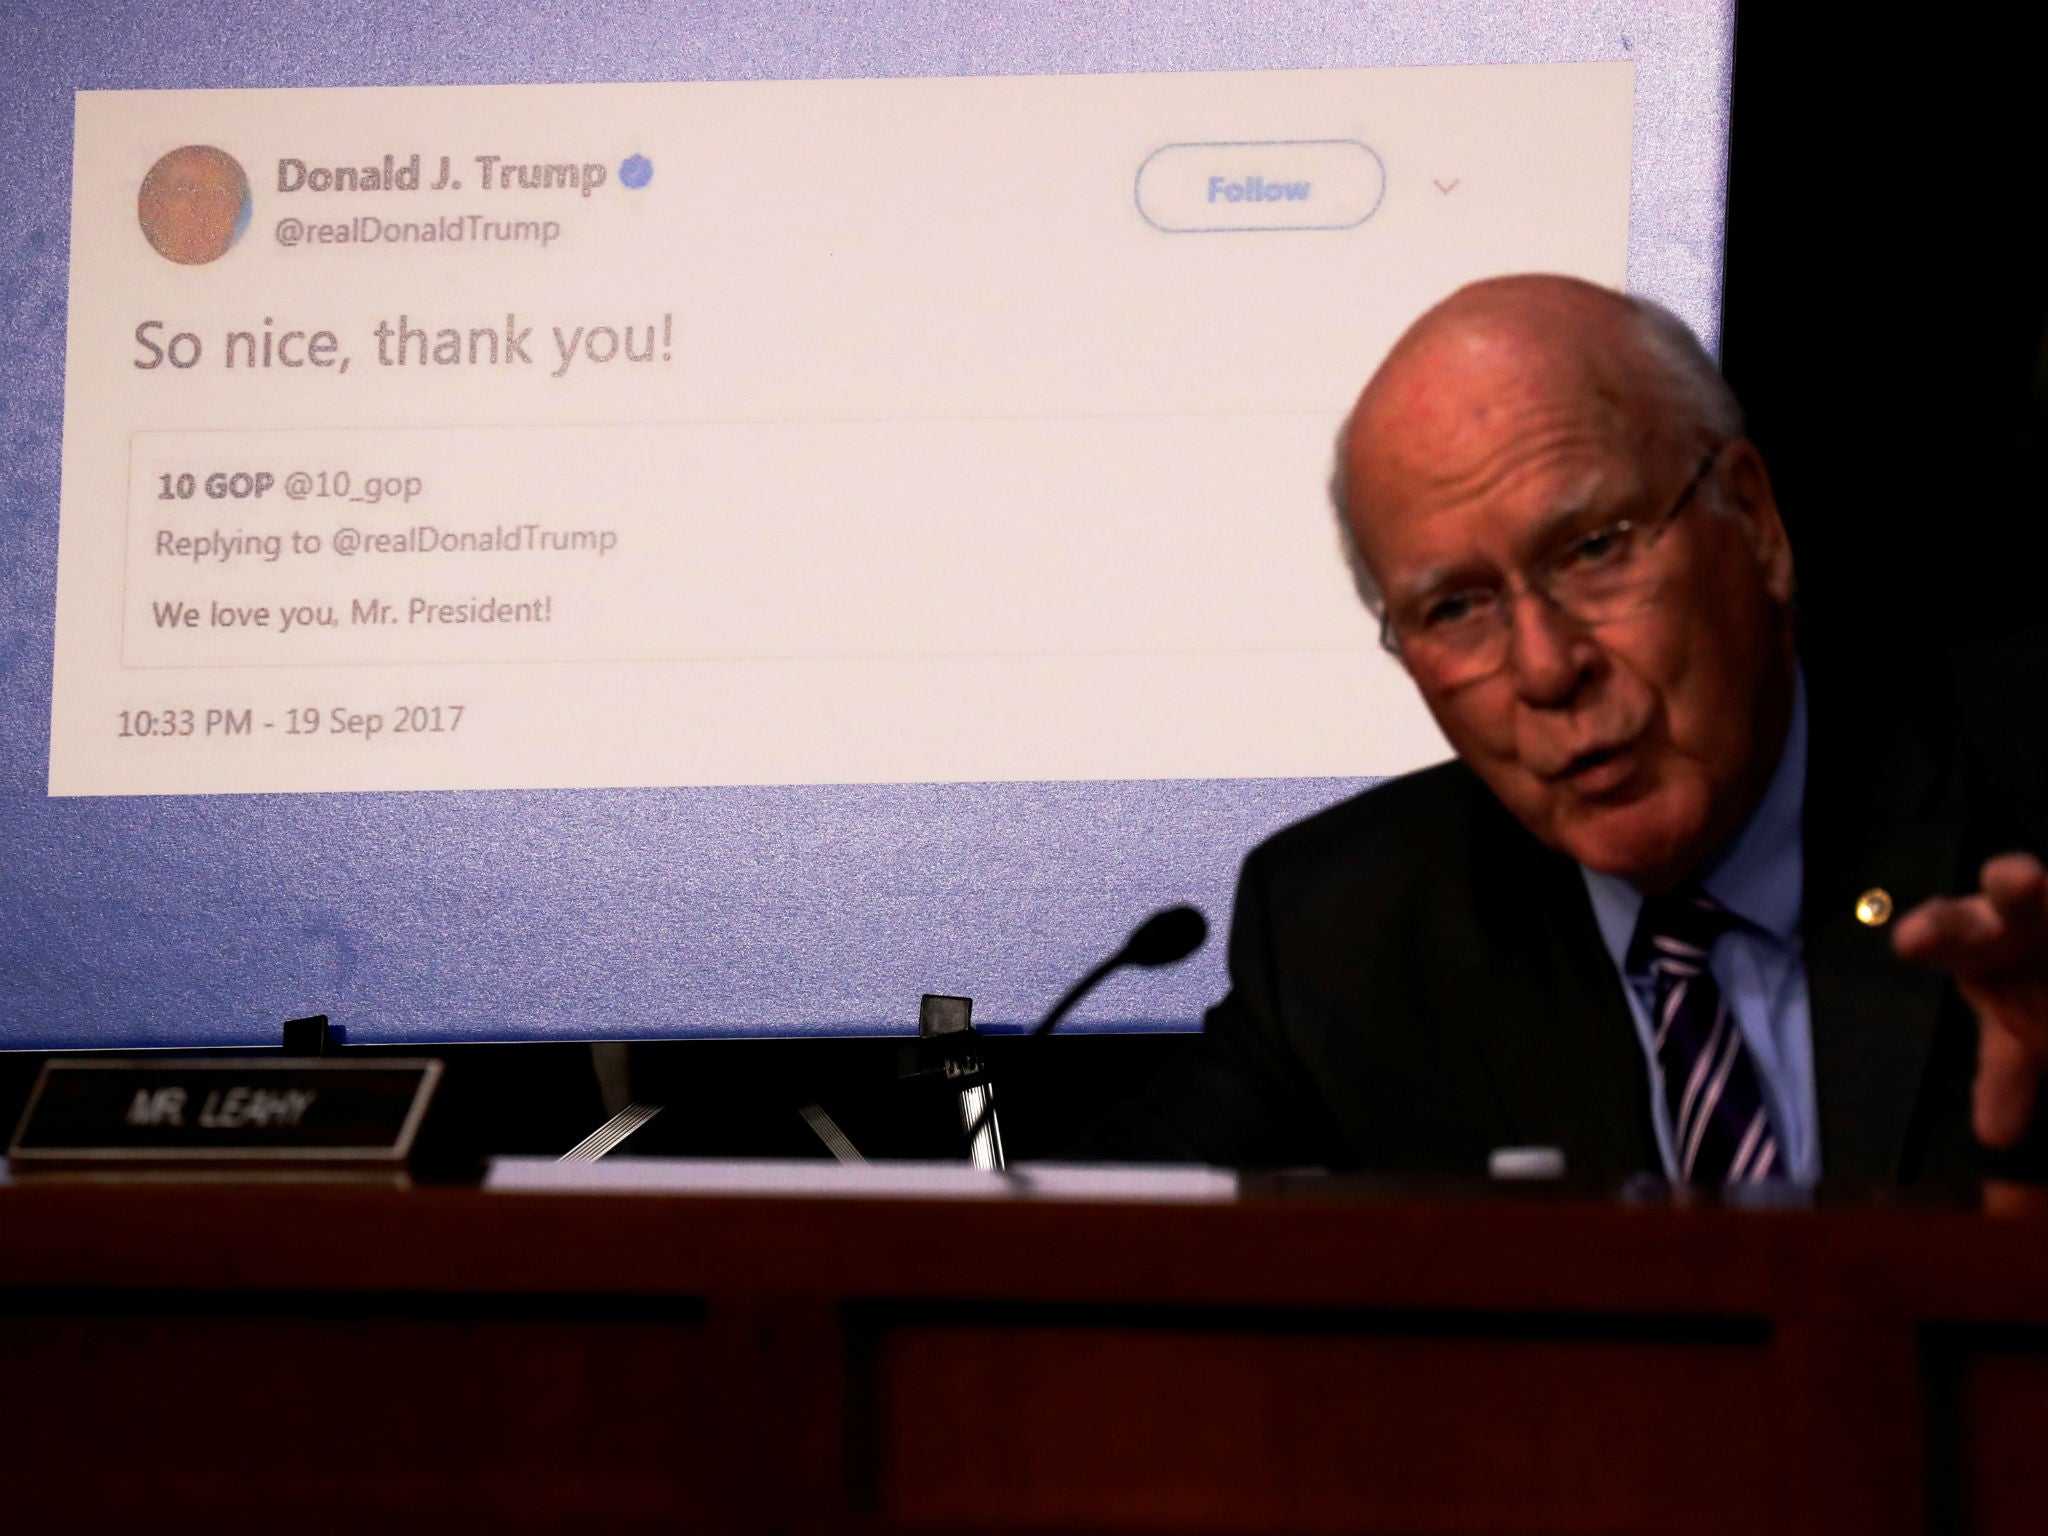 Senator Pat Leahy shows a re-tweet by President Trump of an alleged Russian troll account as representatives of Twitter, Facebook and Google testify before on Capitol Hill on October 31, 2017